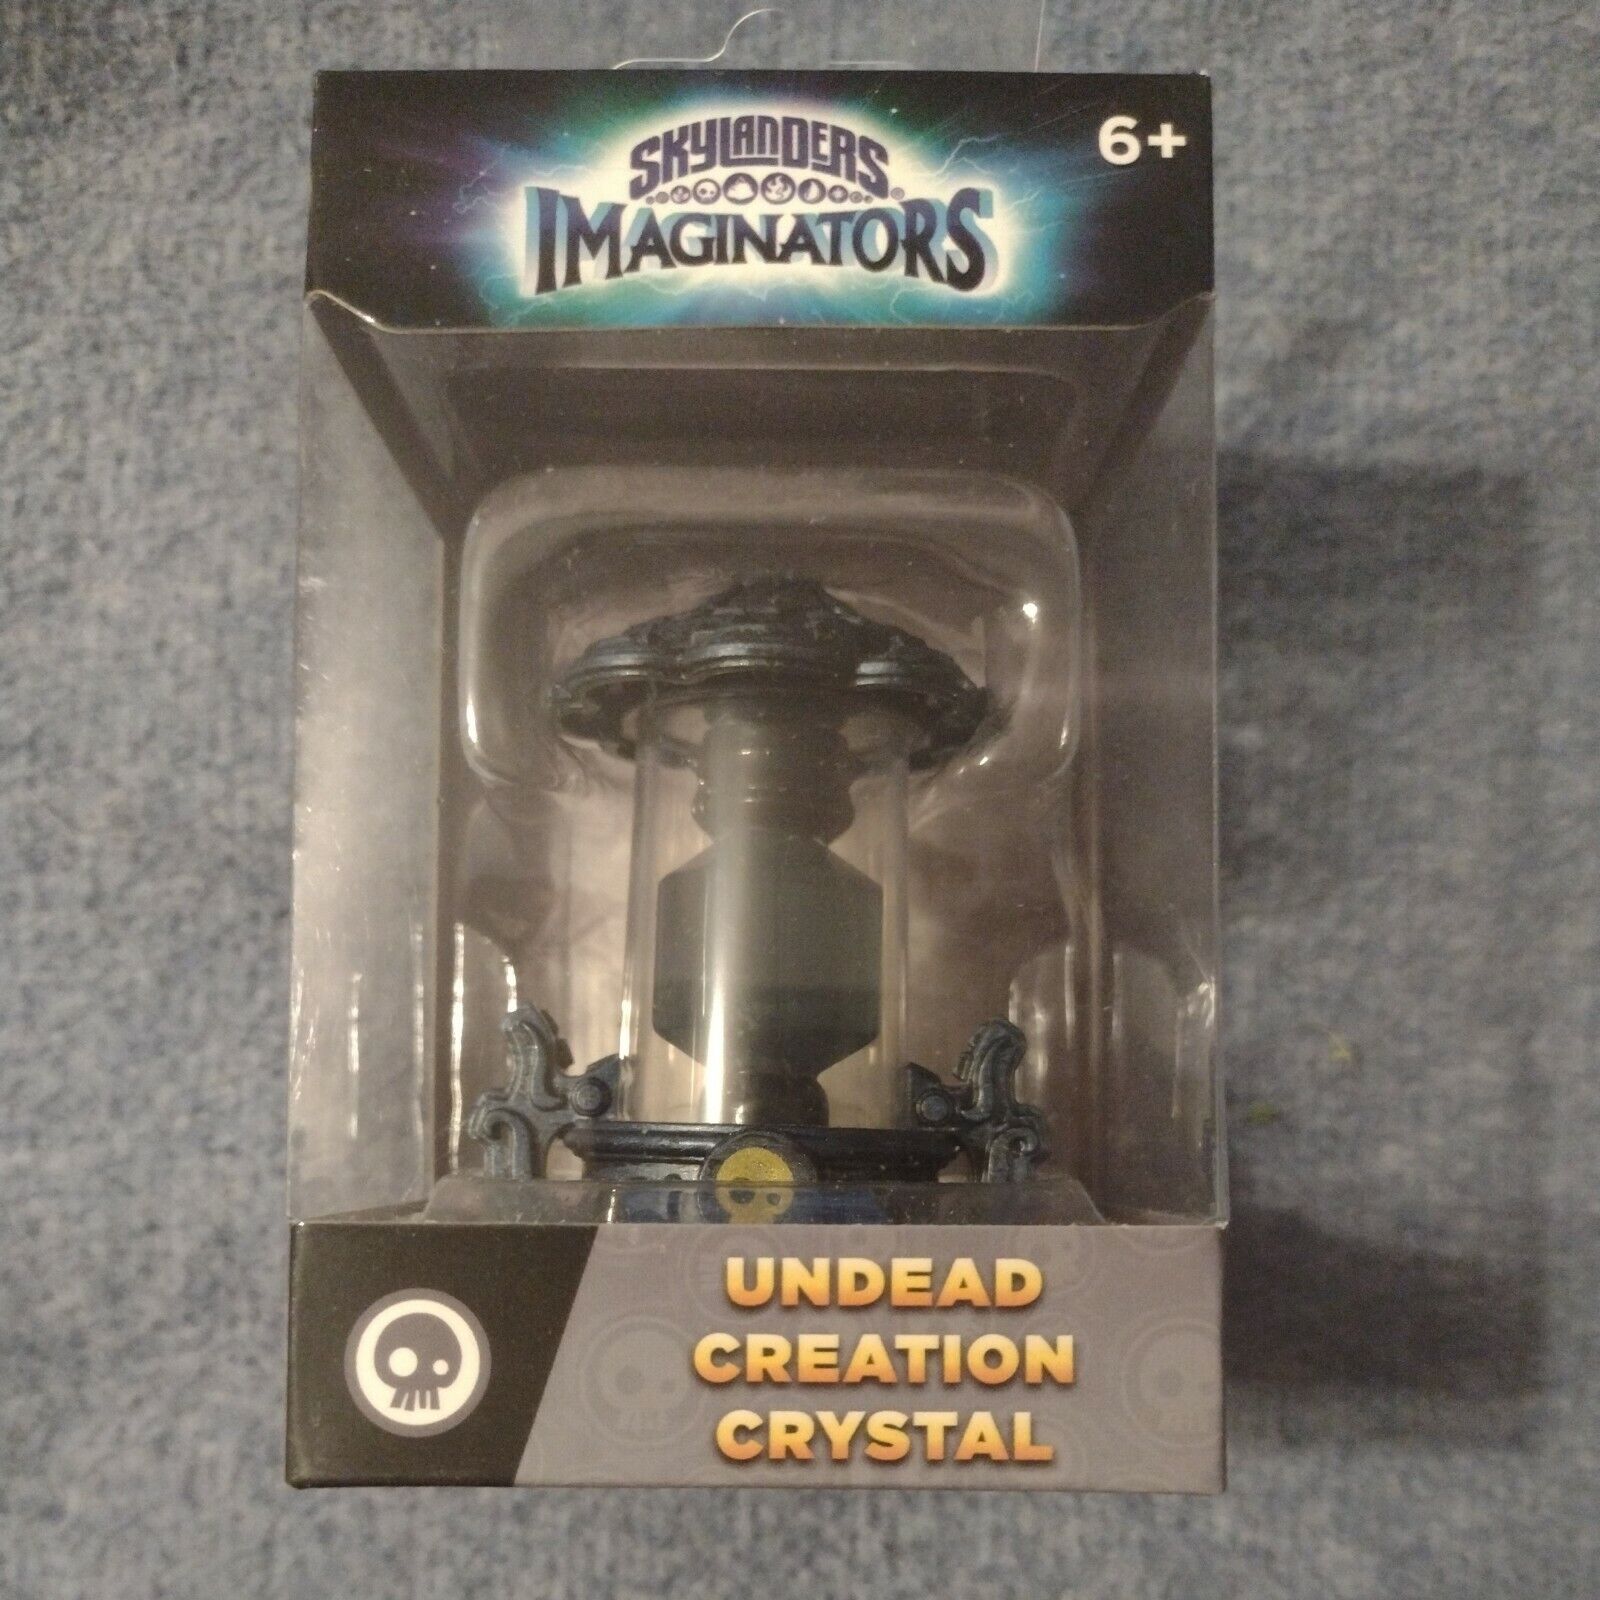 COMLETELY NEW 至高 返品交換不可 AND IN THE BOX IMAGINATORS CREATION UNDEAD SKYLANDERS CRYSTAL